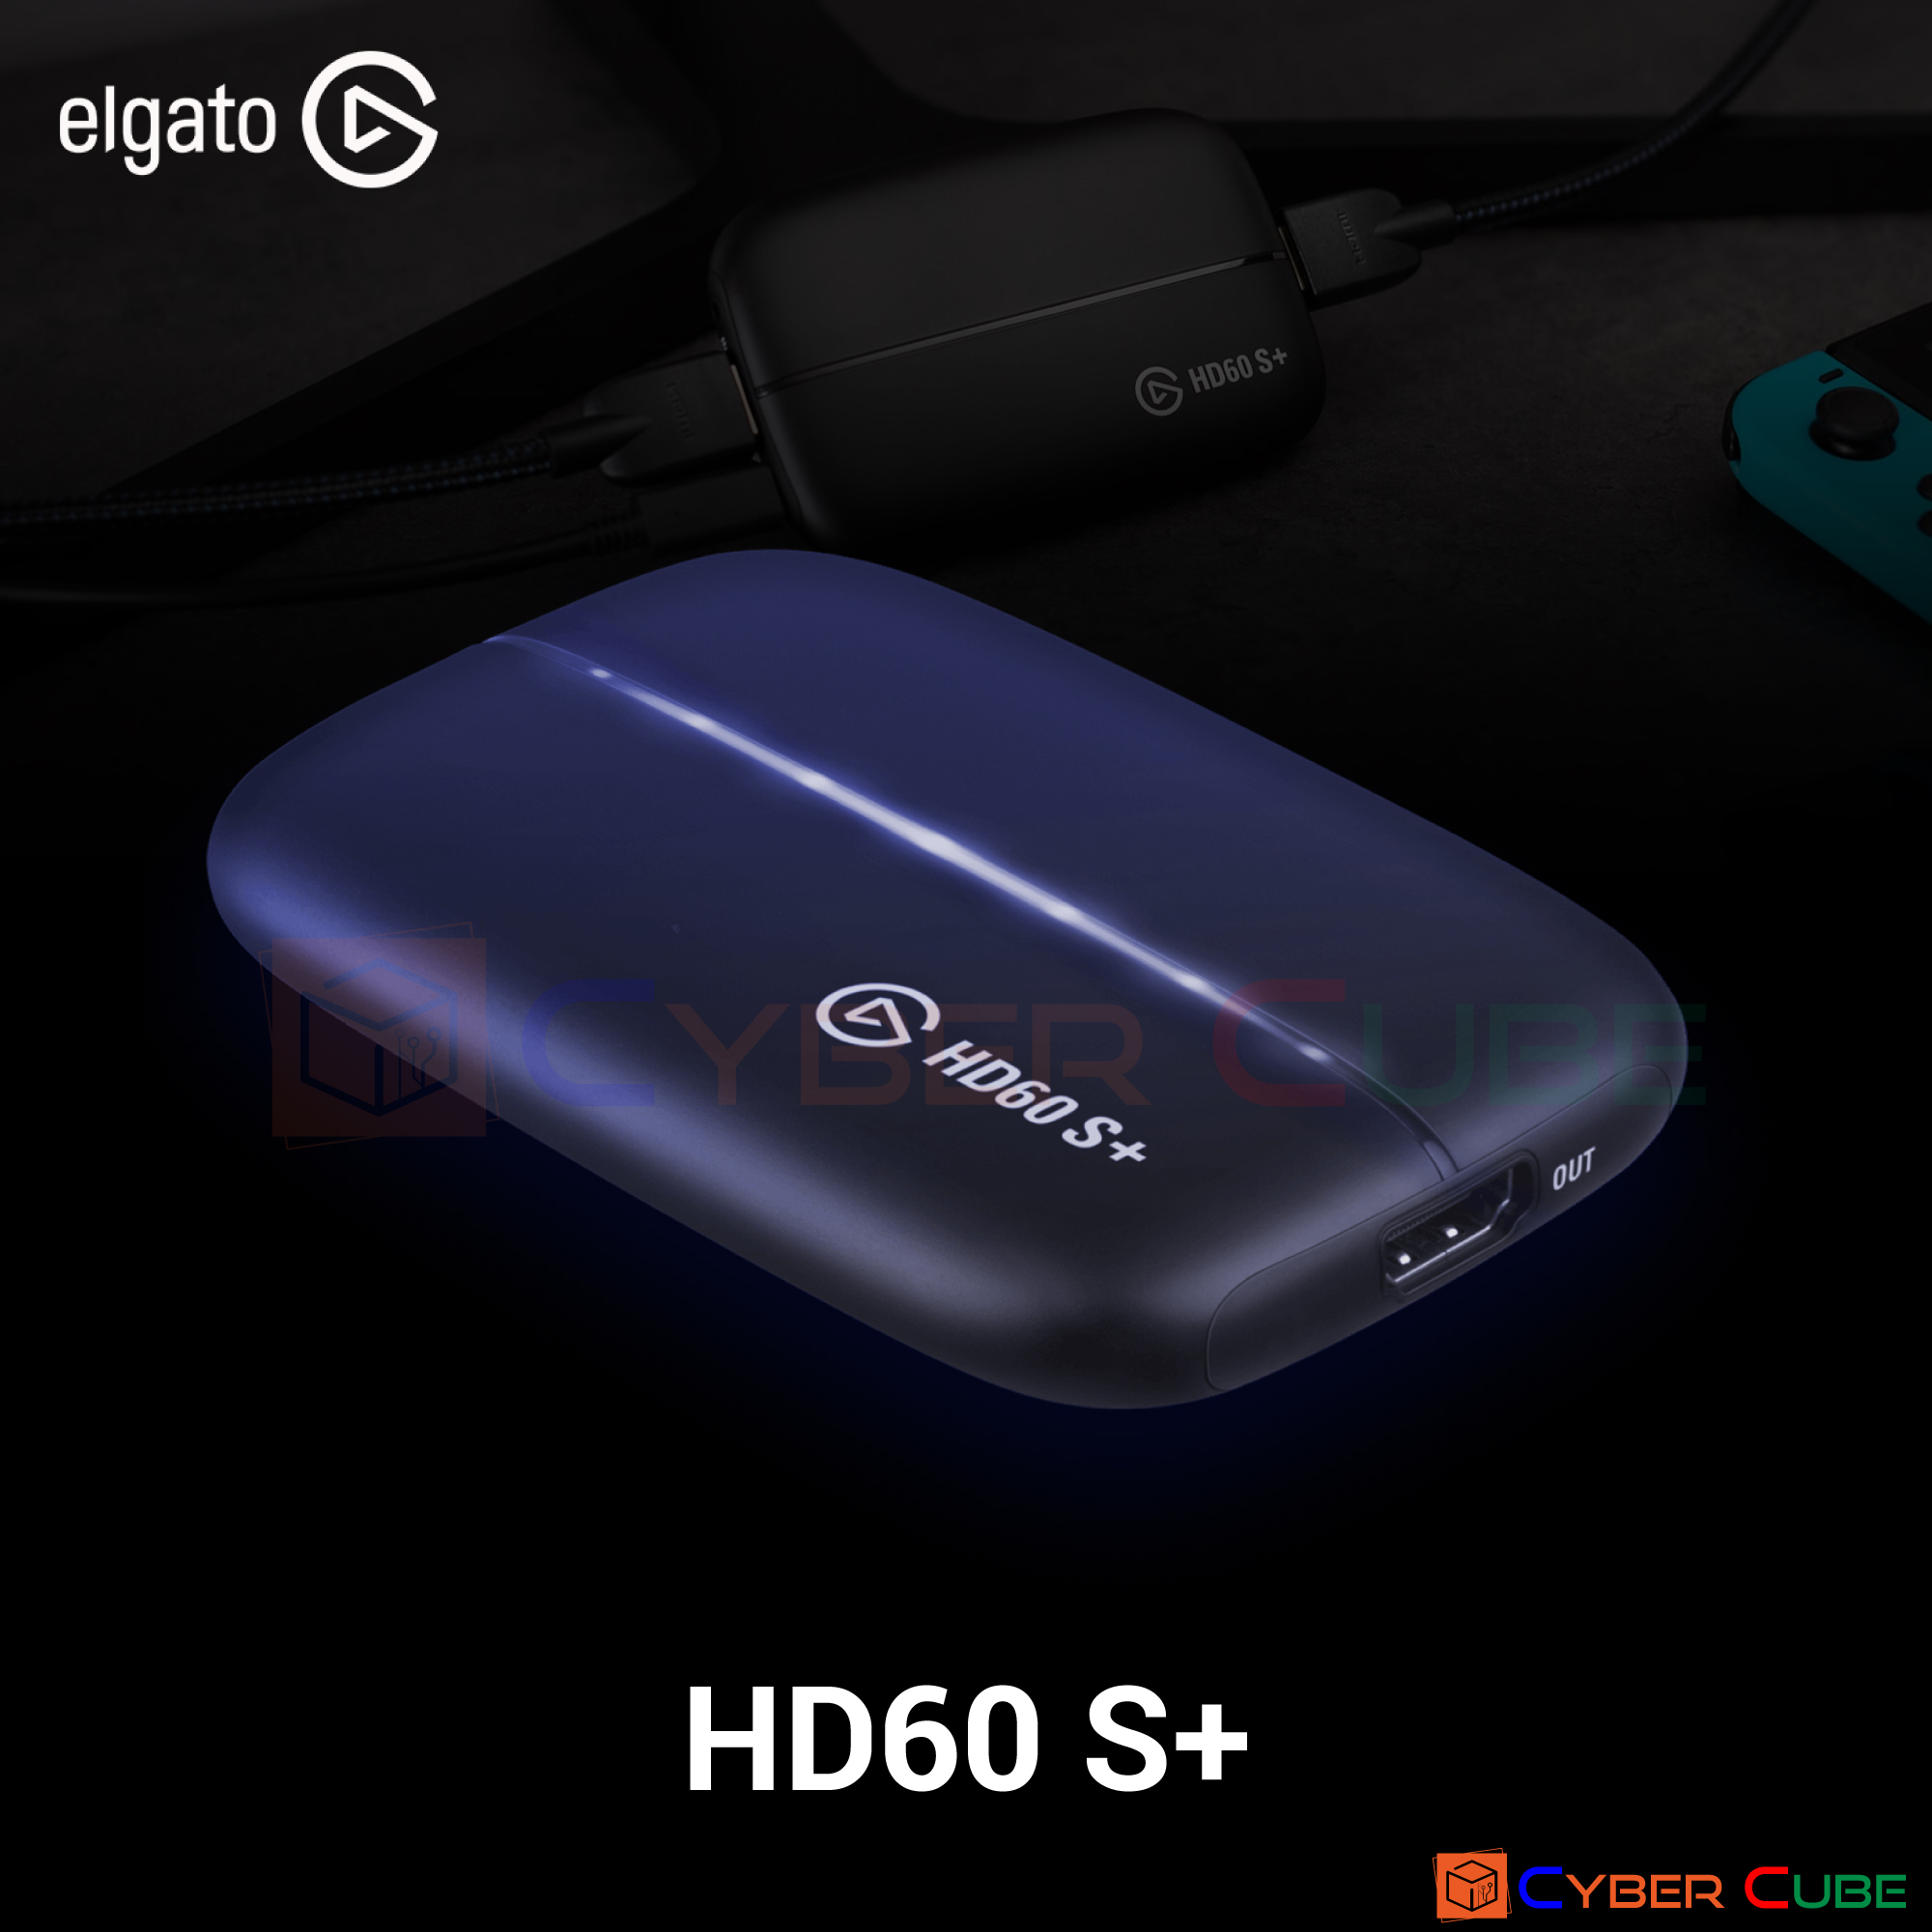 ELGATO HD60 S+ (USB 3.0) (อุปกรณ์จับภาพหน้าจอ) (For Streaming & Live) /up to 2160p60 /HDR10* /60Mbps /For PC, Mac, & Game Consoles (unencrypted HDMI)